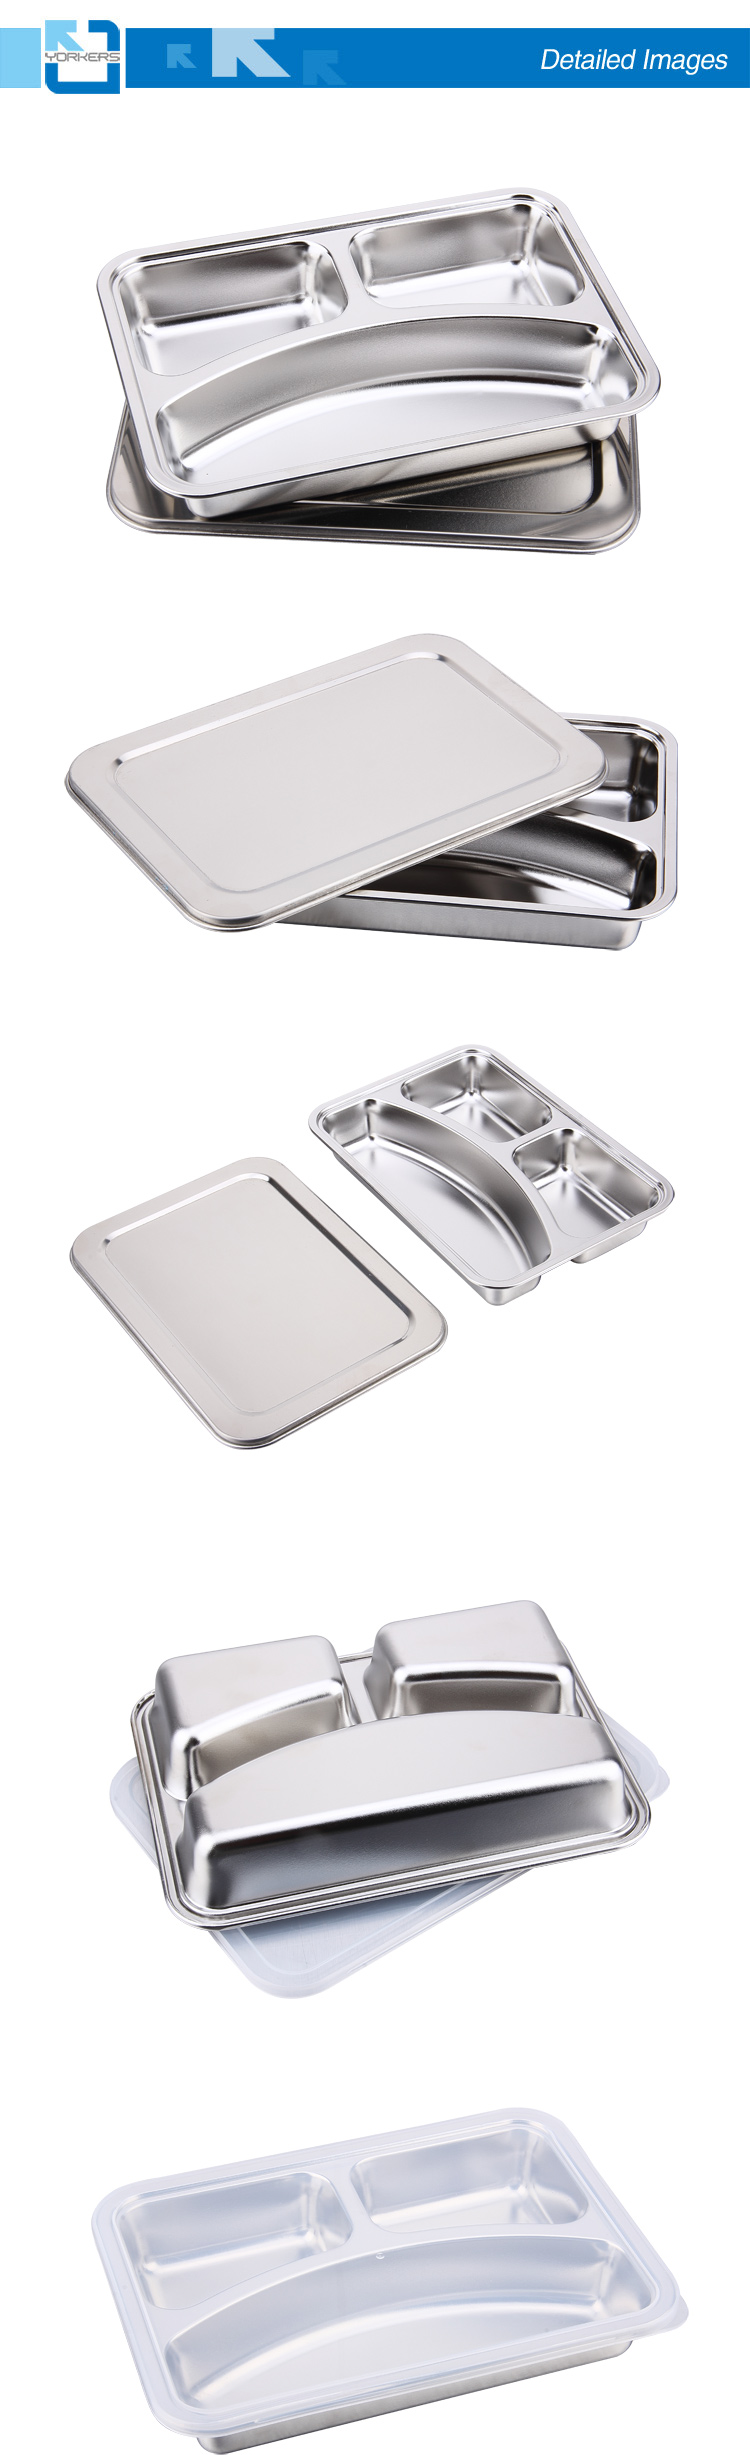 3 Compartment Stainless Steel Food Tray Plate for Kids